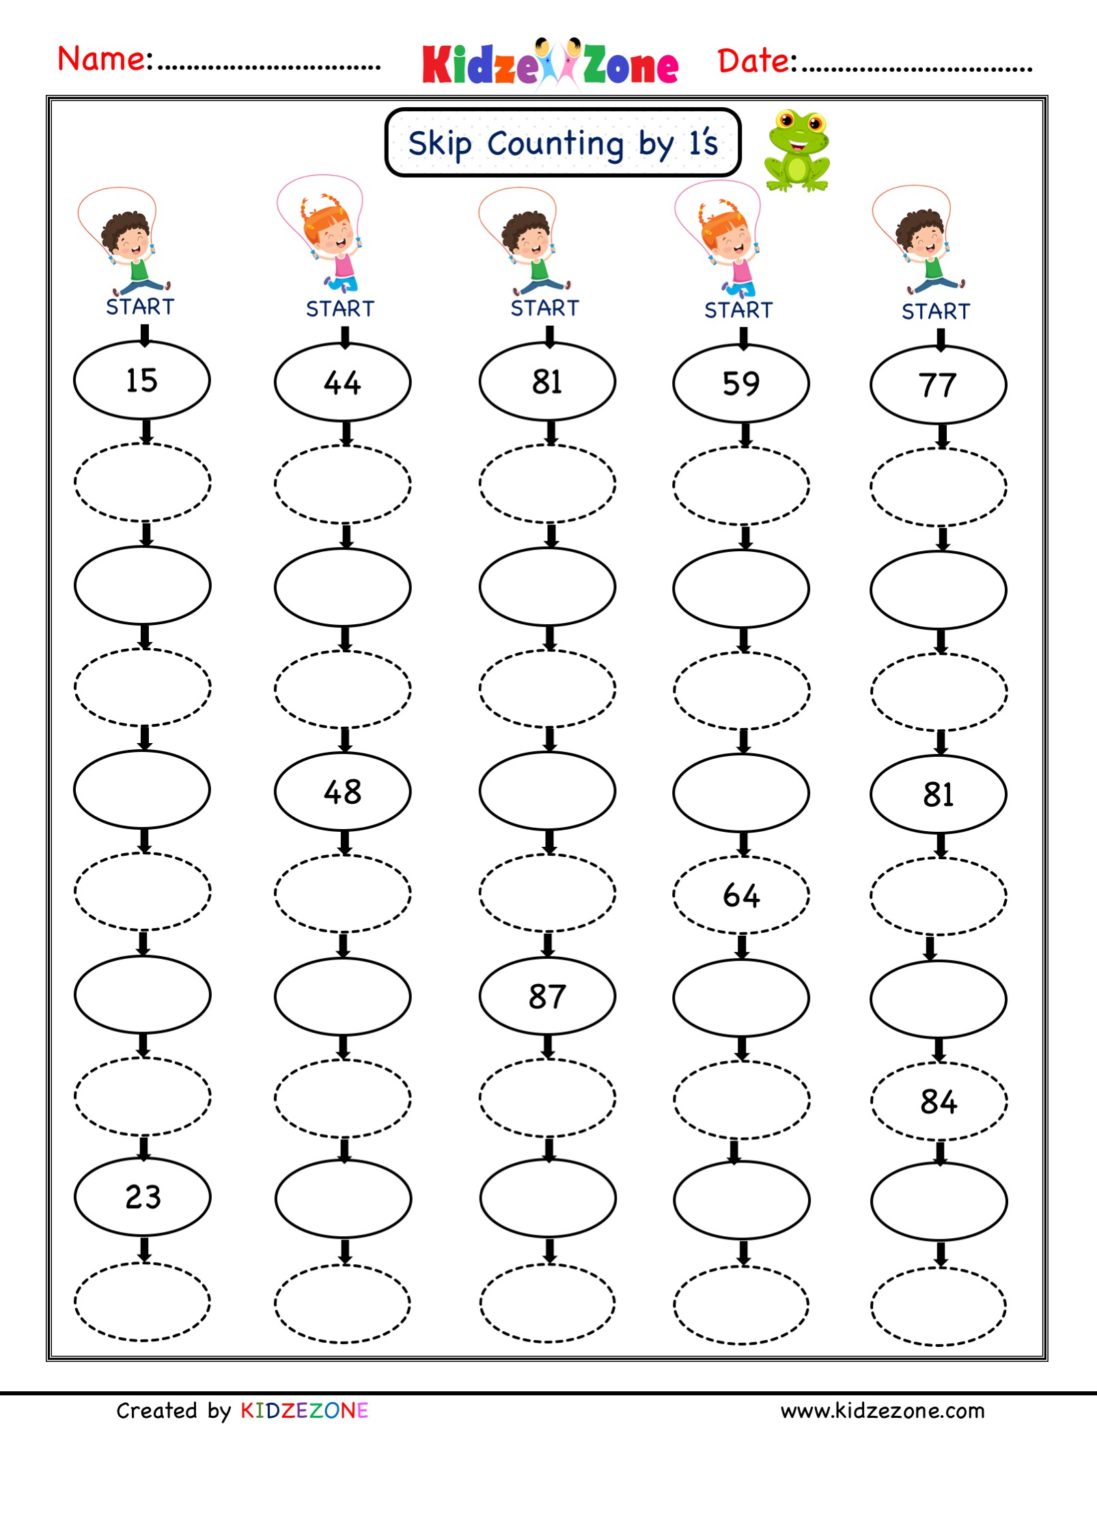 skip-counting-by-2-worksheets-99worksheets-skip-counting-by-2